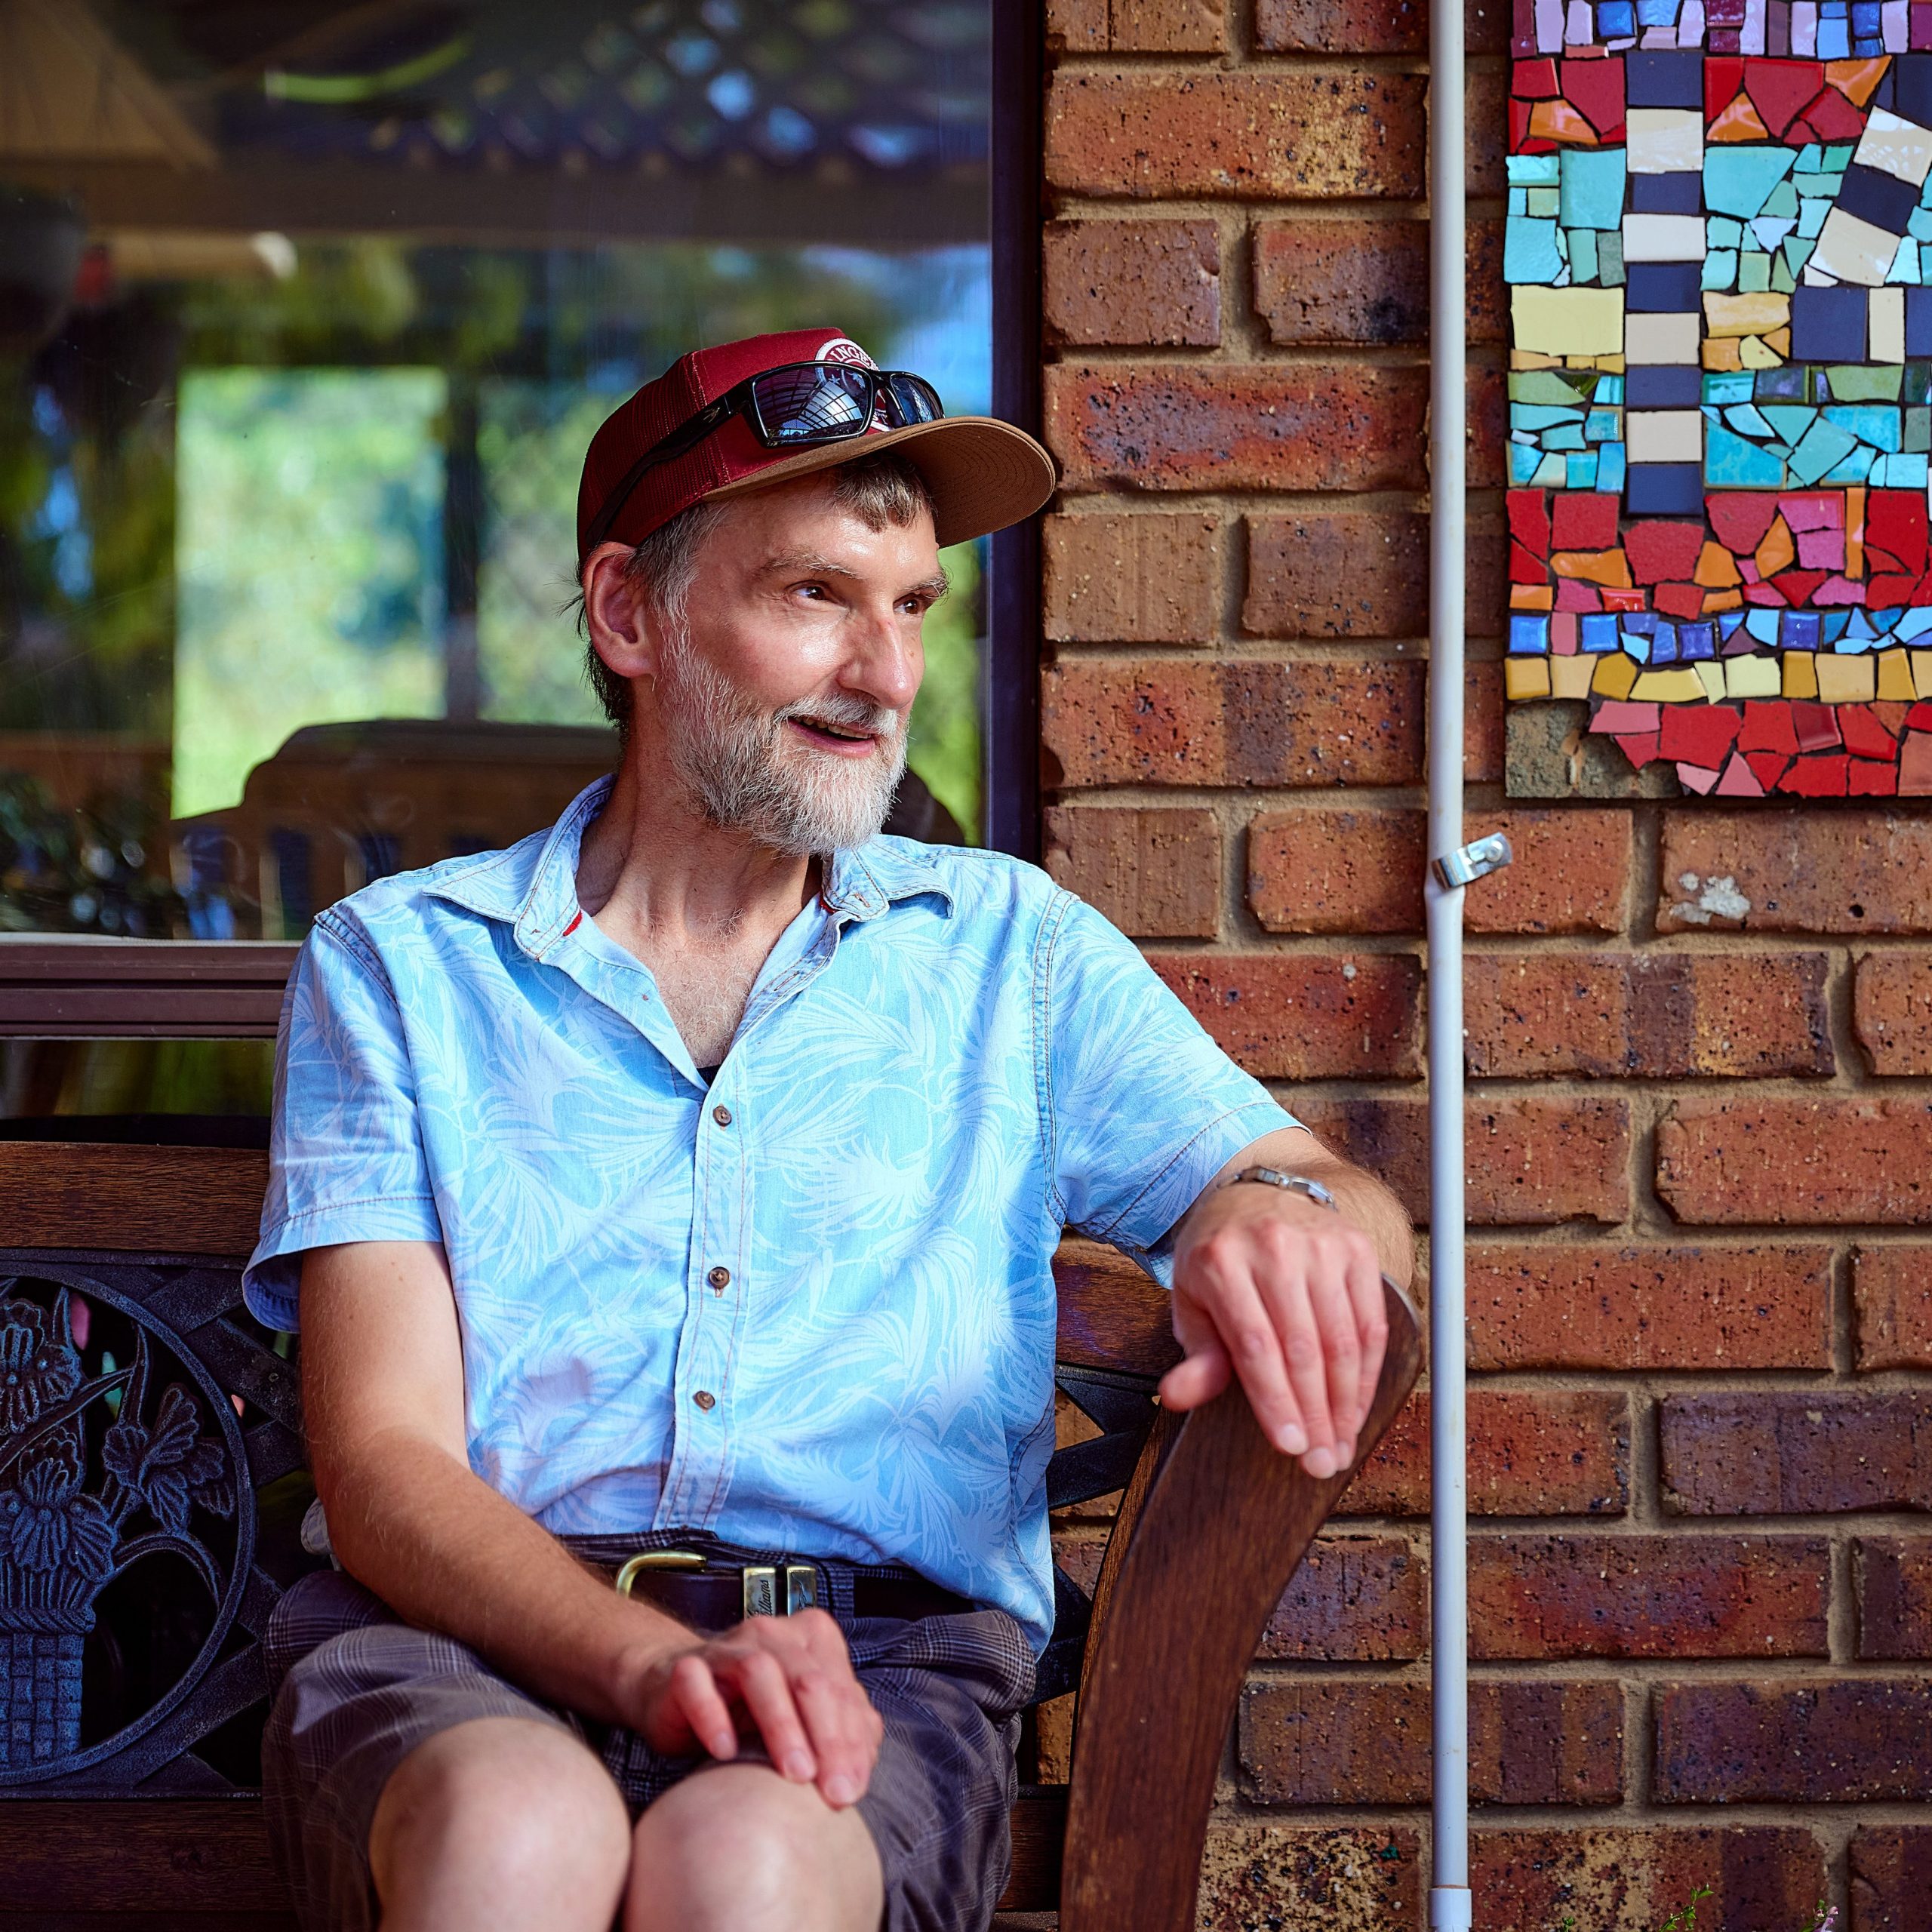 A man smiling in a light blue shirt and dark grey shorts sitting on a bench on the porch of his home